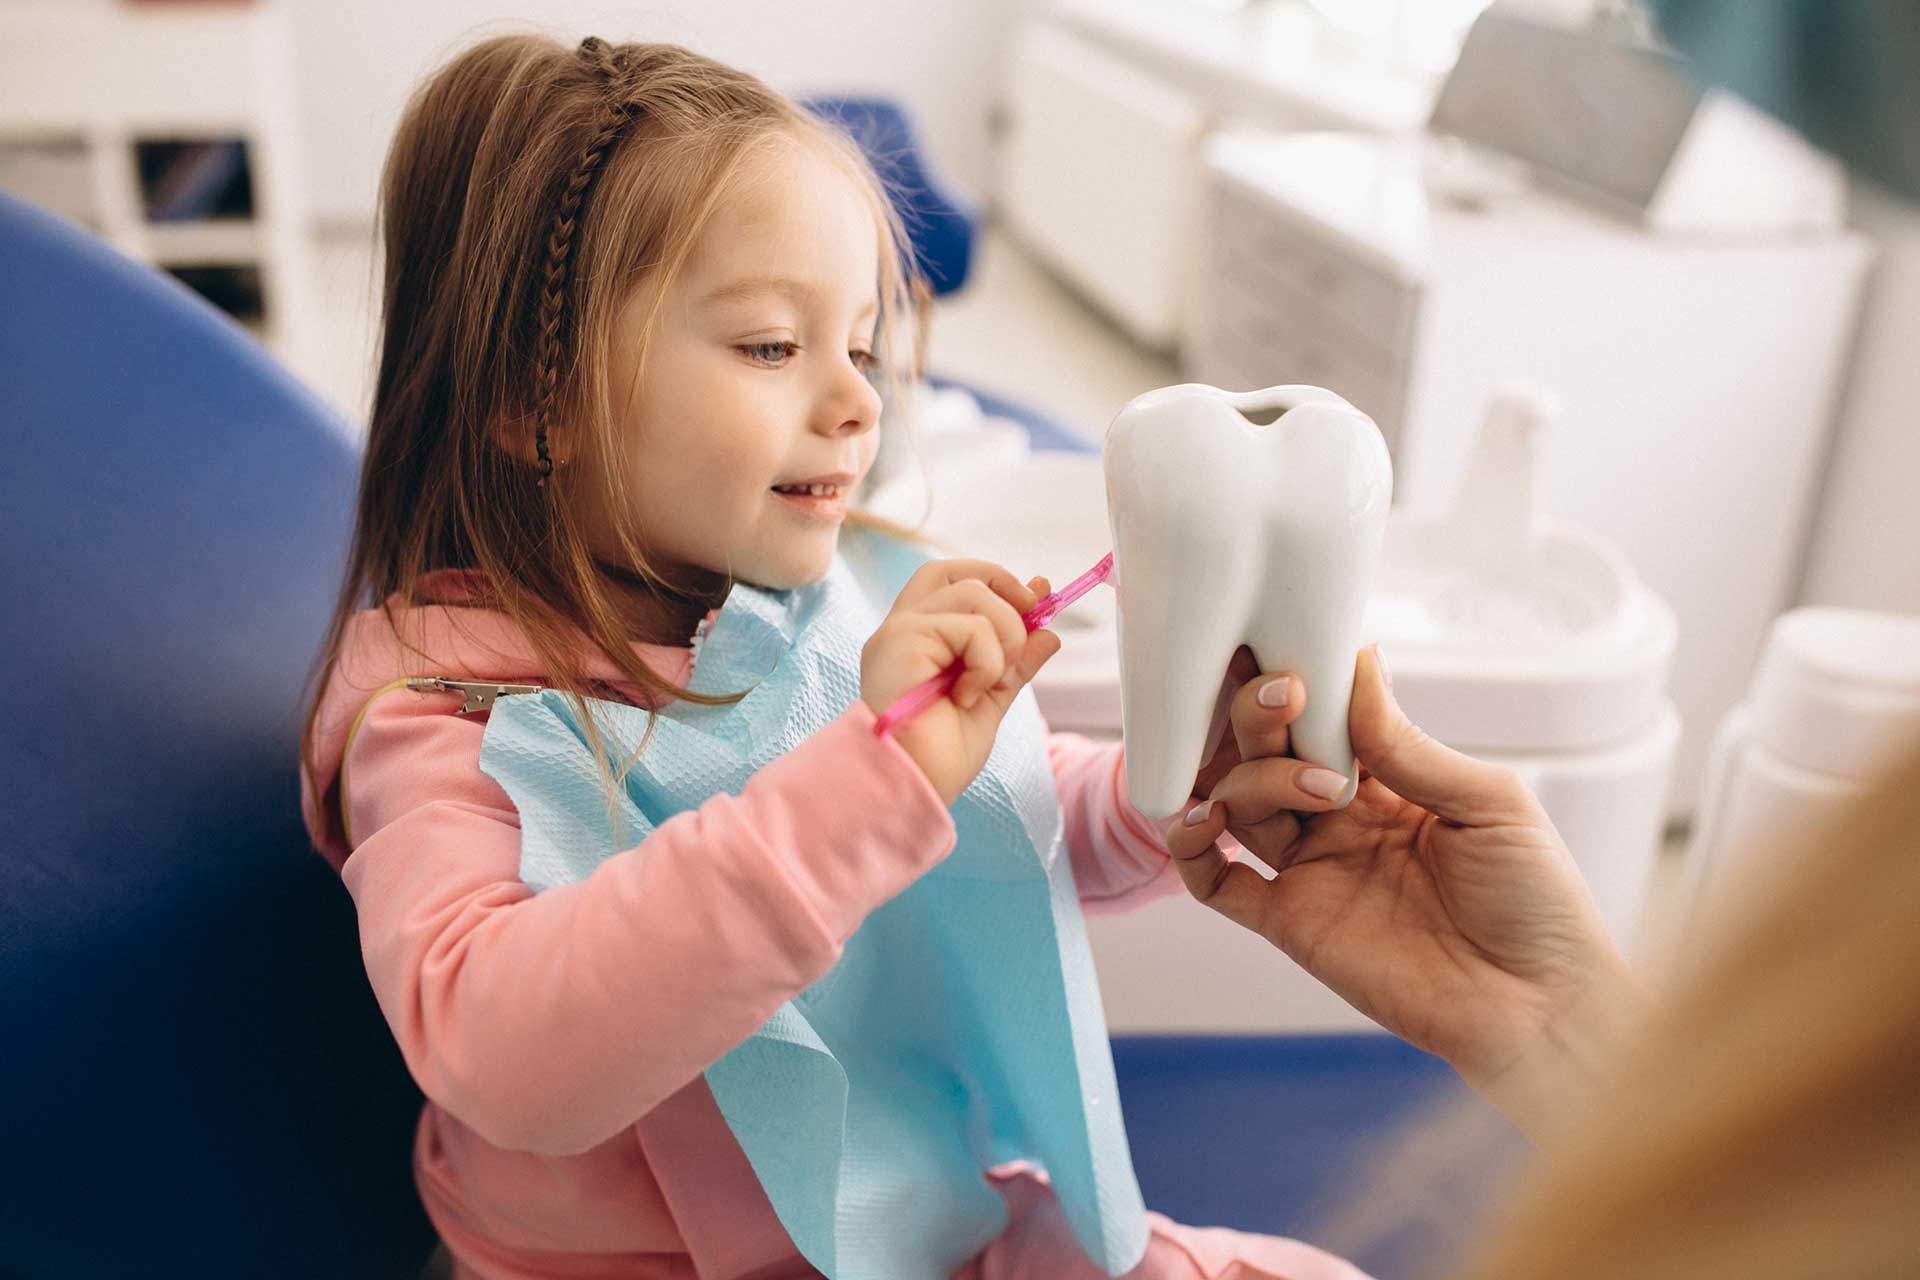 Recommendations for Parents on Children's Dental Health